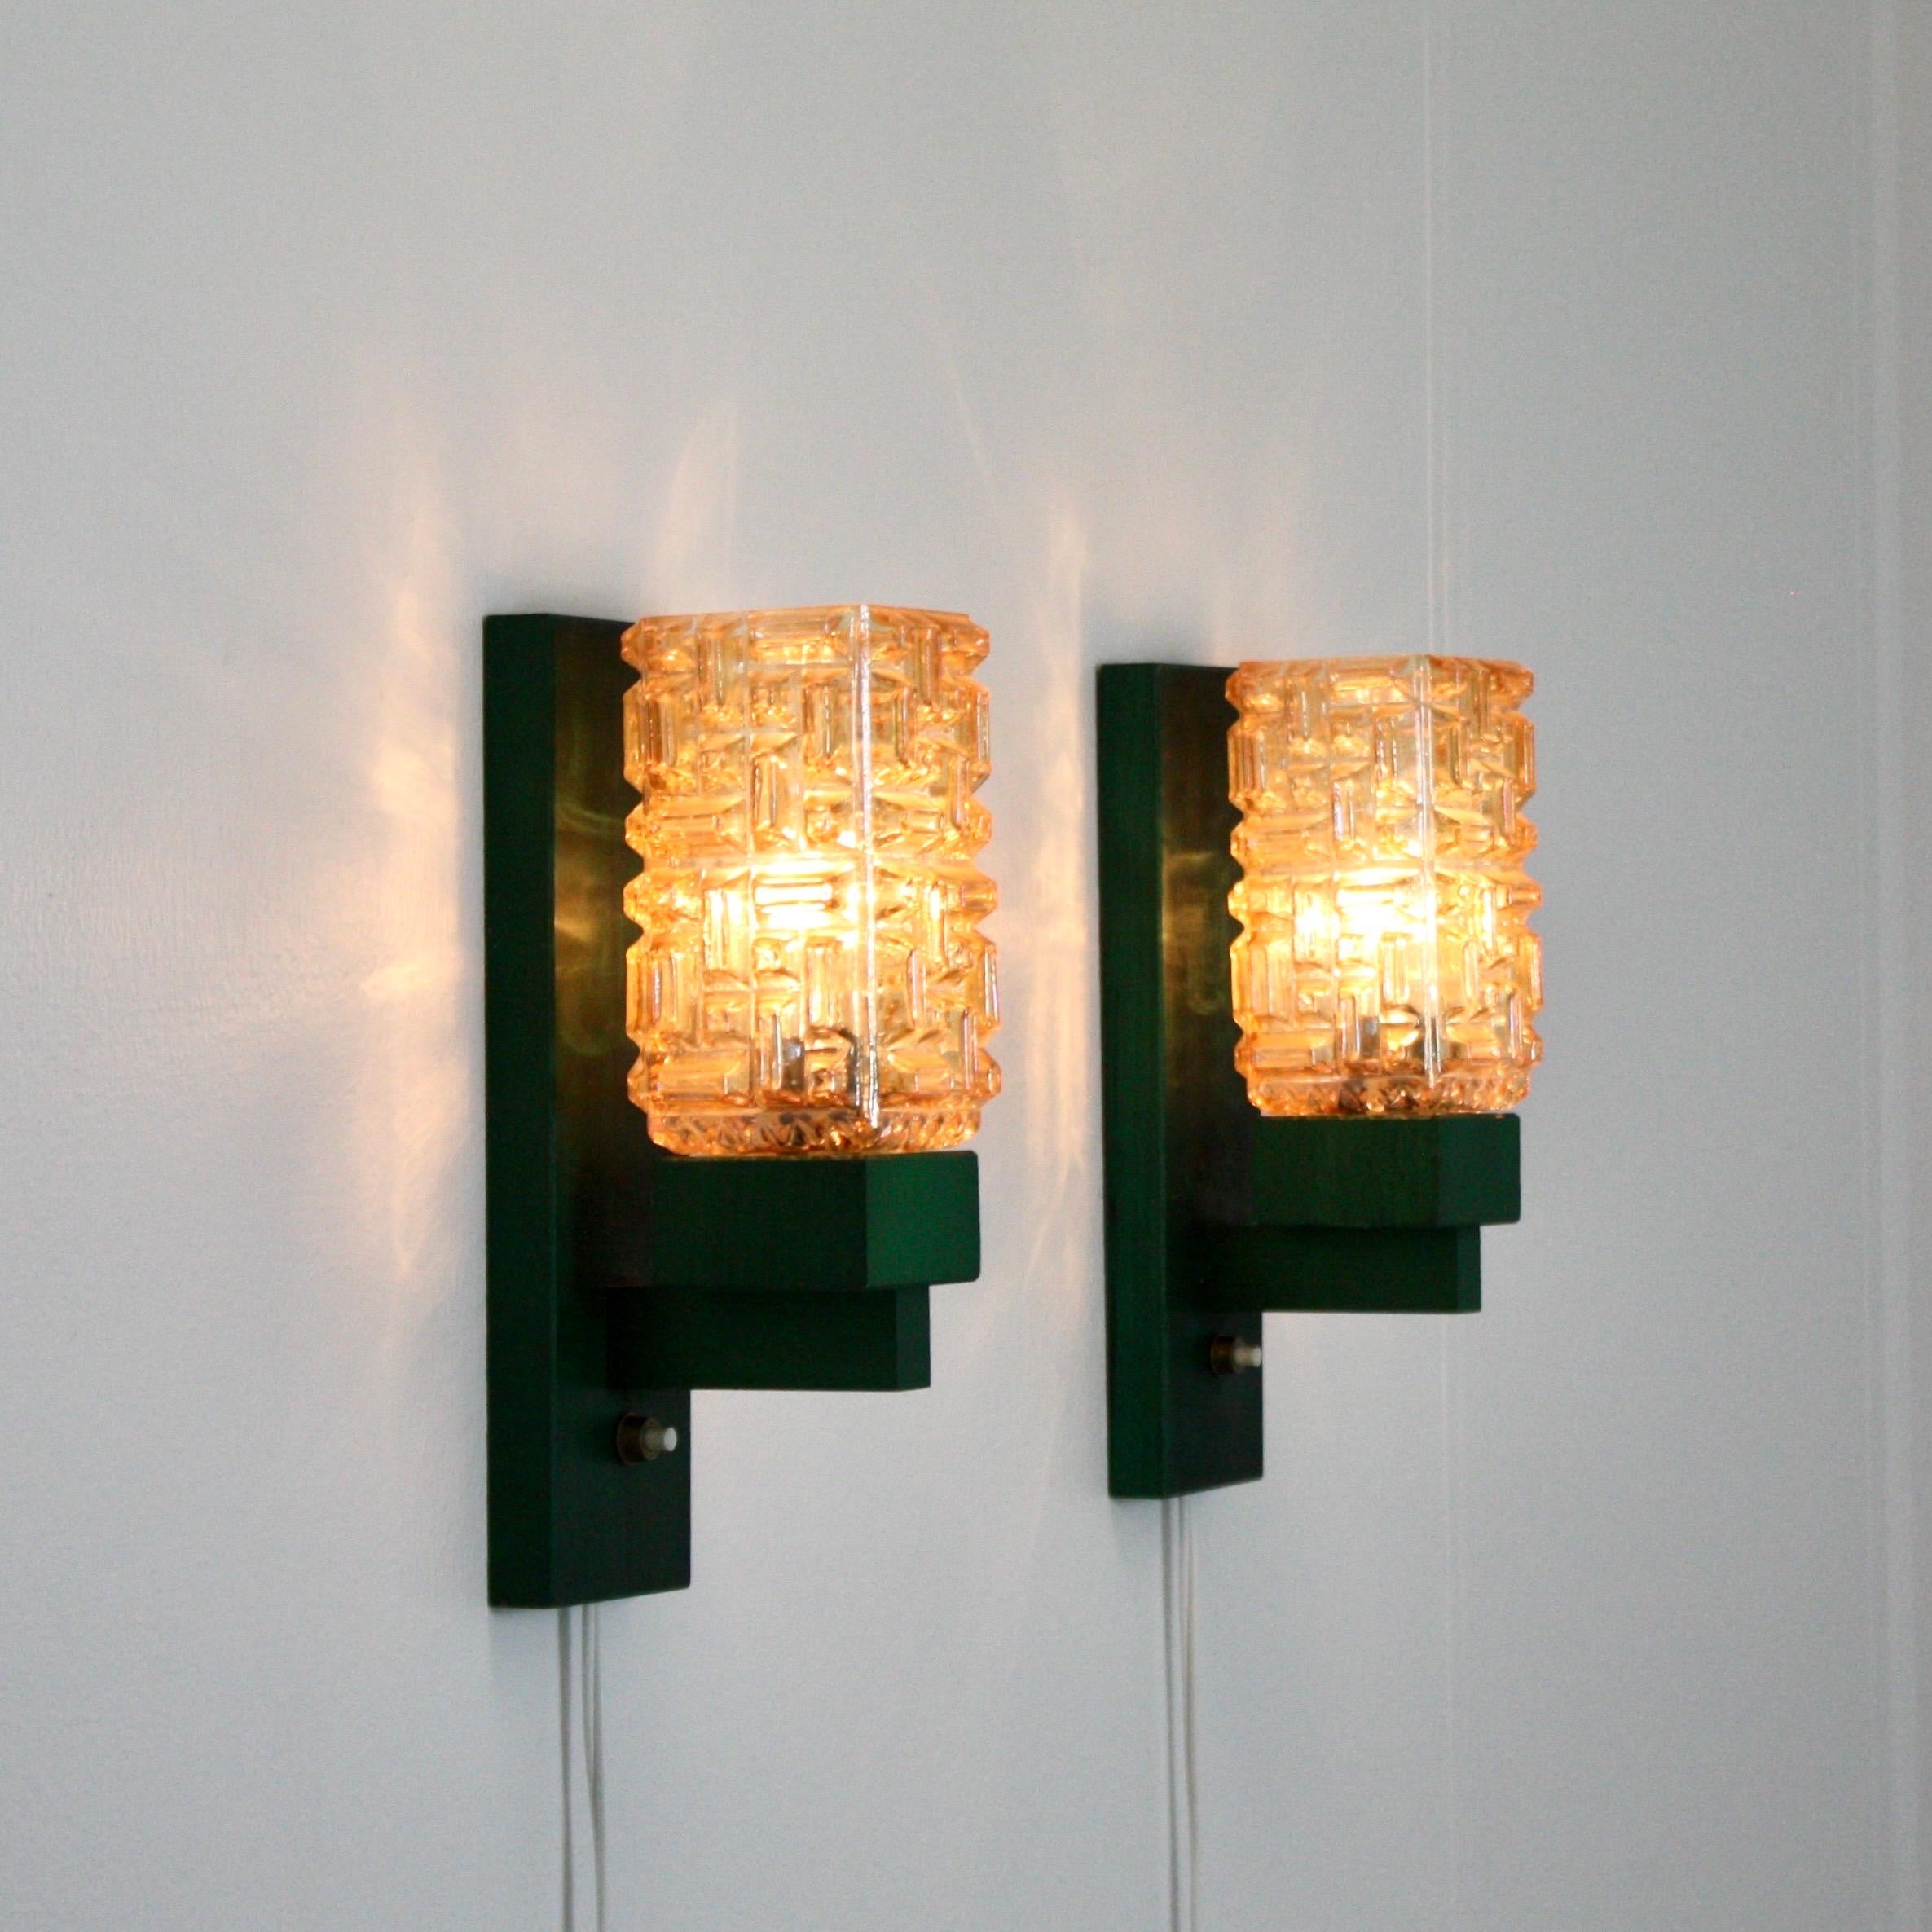 Set of 'Vitrika' Wall Lamps in green stained wood & Amber Glass, Denmark, 1970s For Sale 6